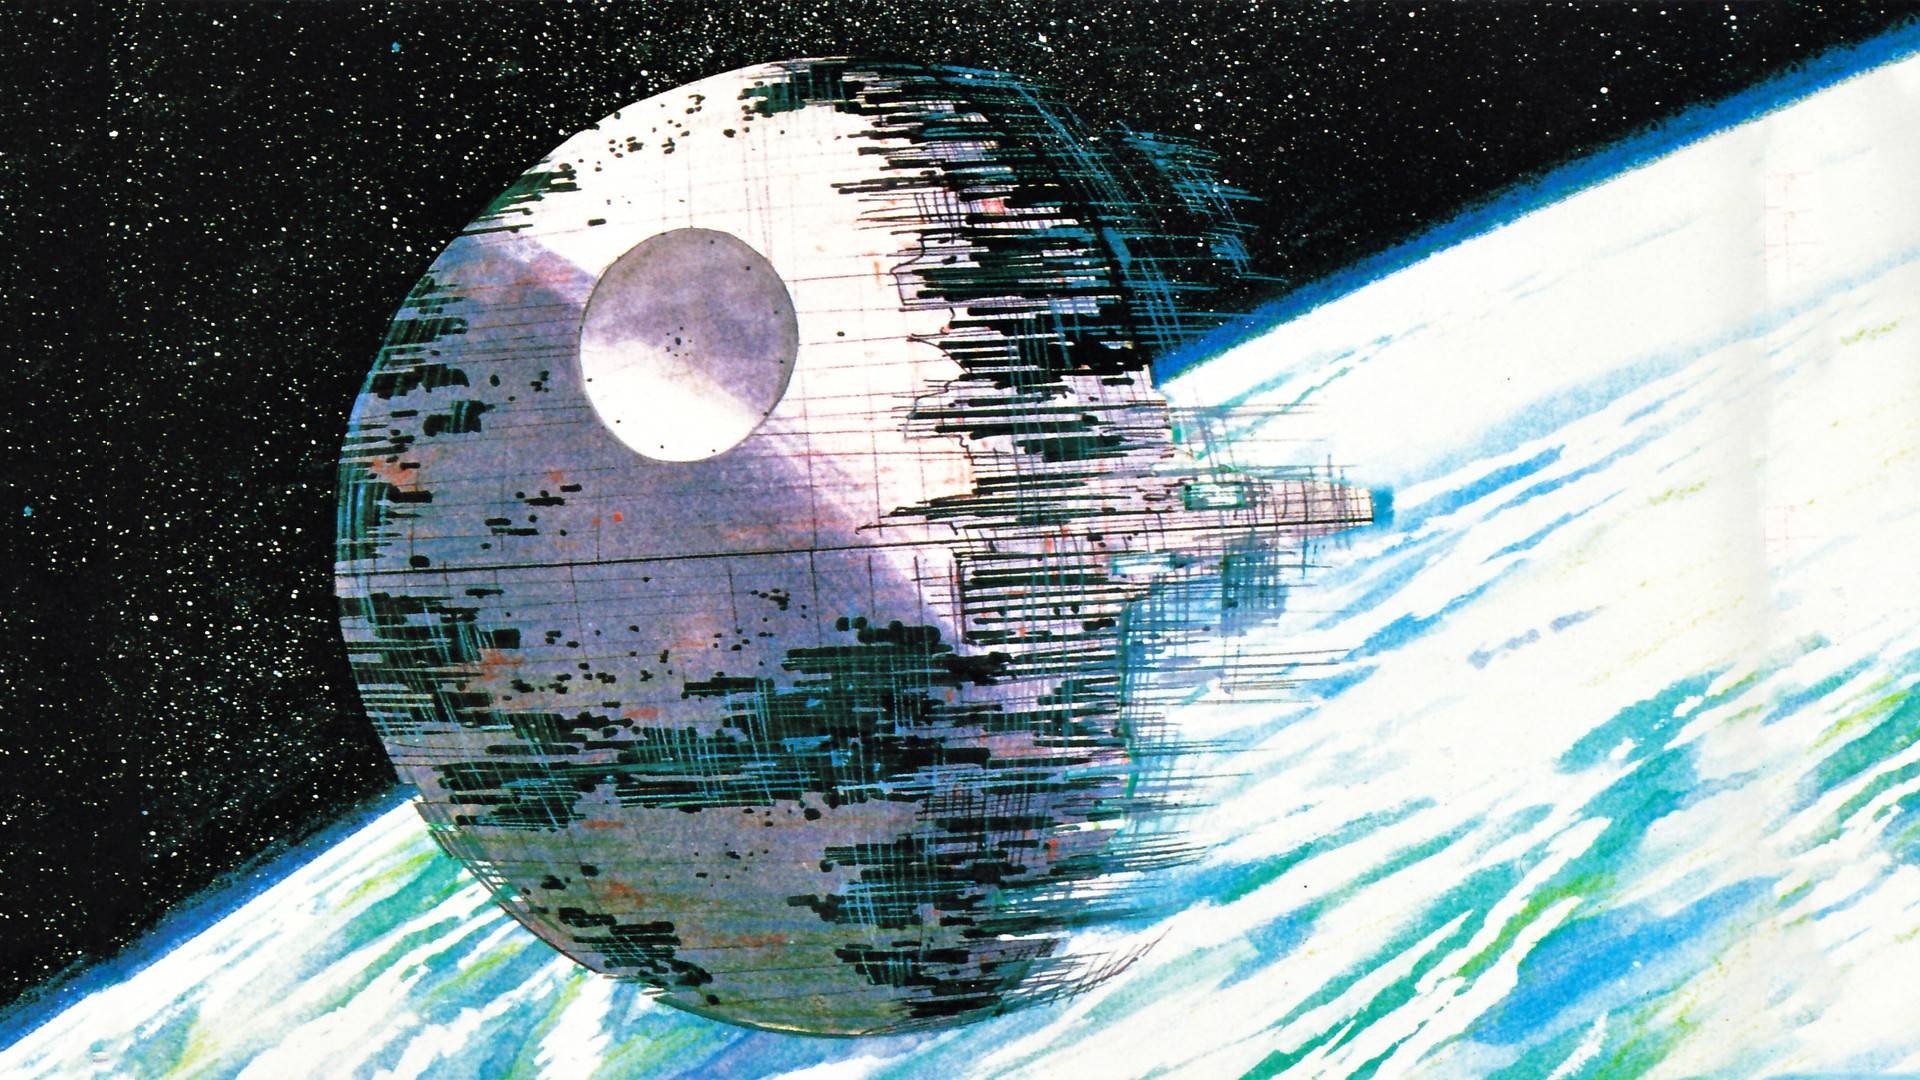 Star Wars Death Star Artwork Wireframe Ralph McQuarrie Space Movies Earth Star Wars Return Of The Je 1920x1080